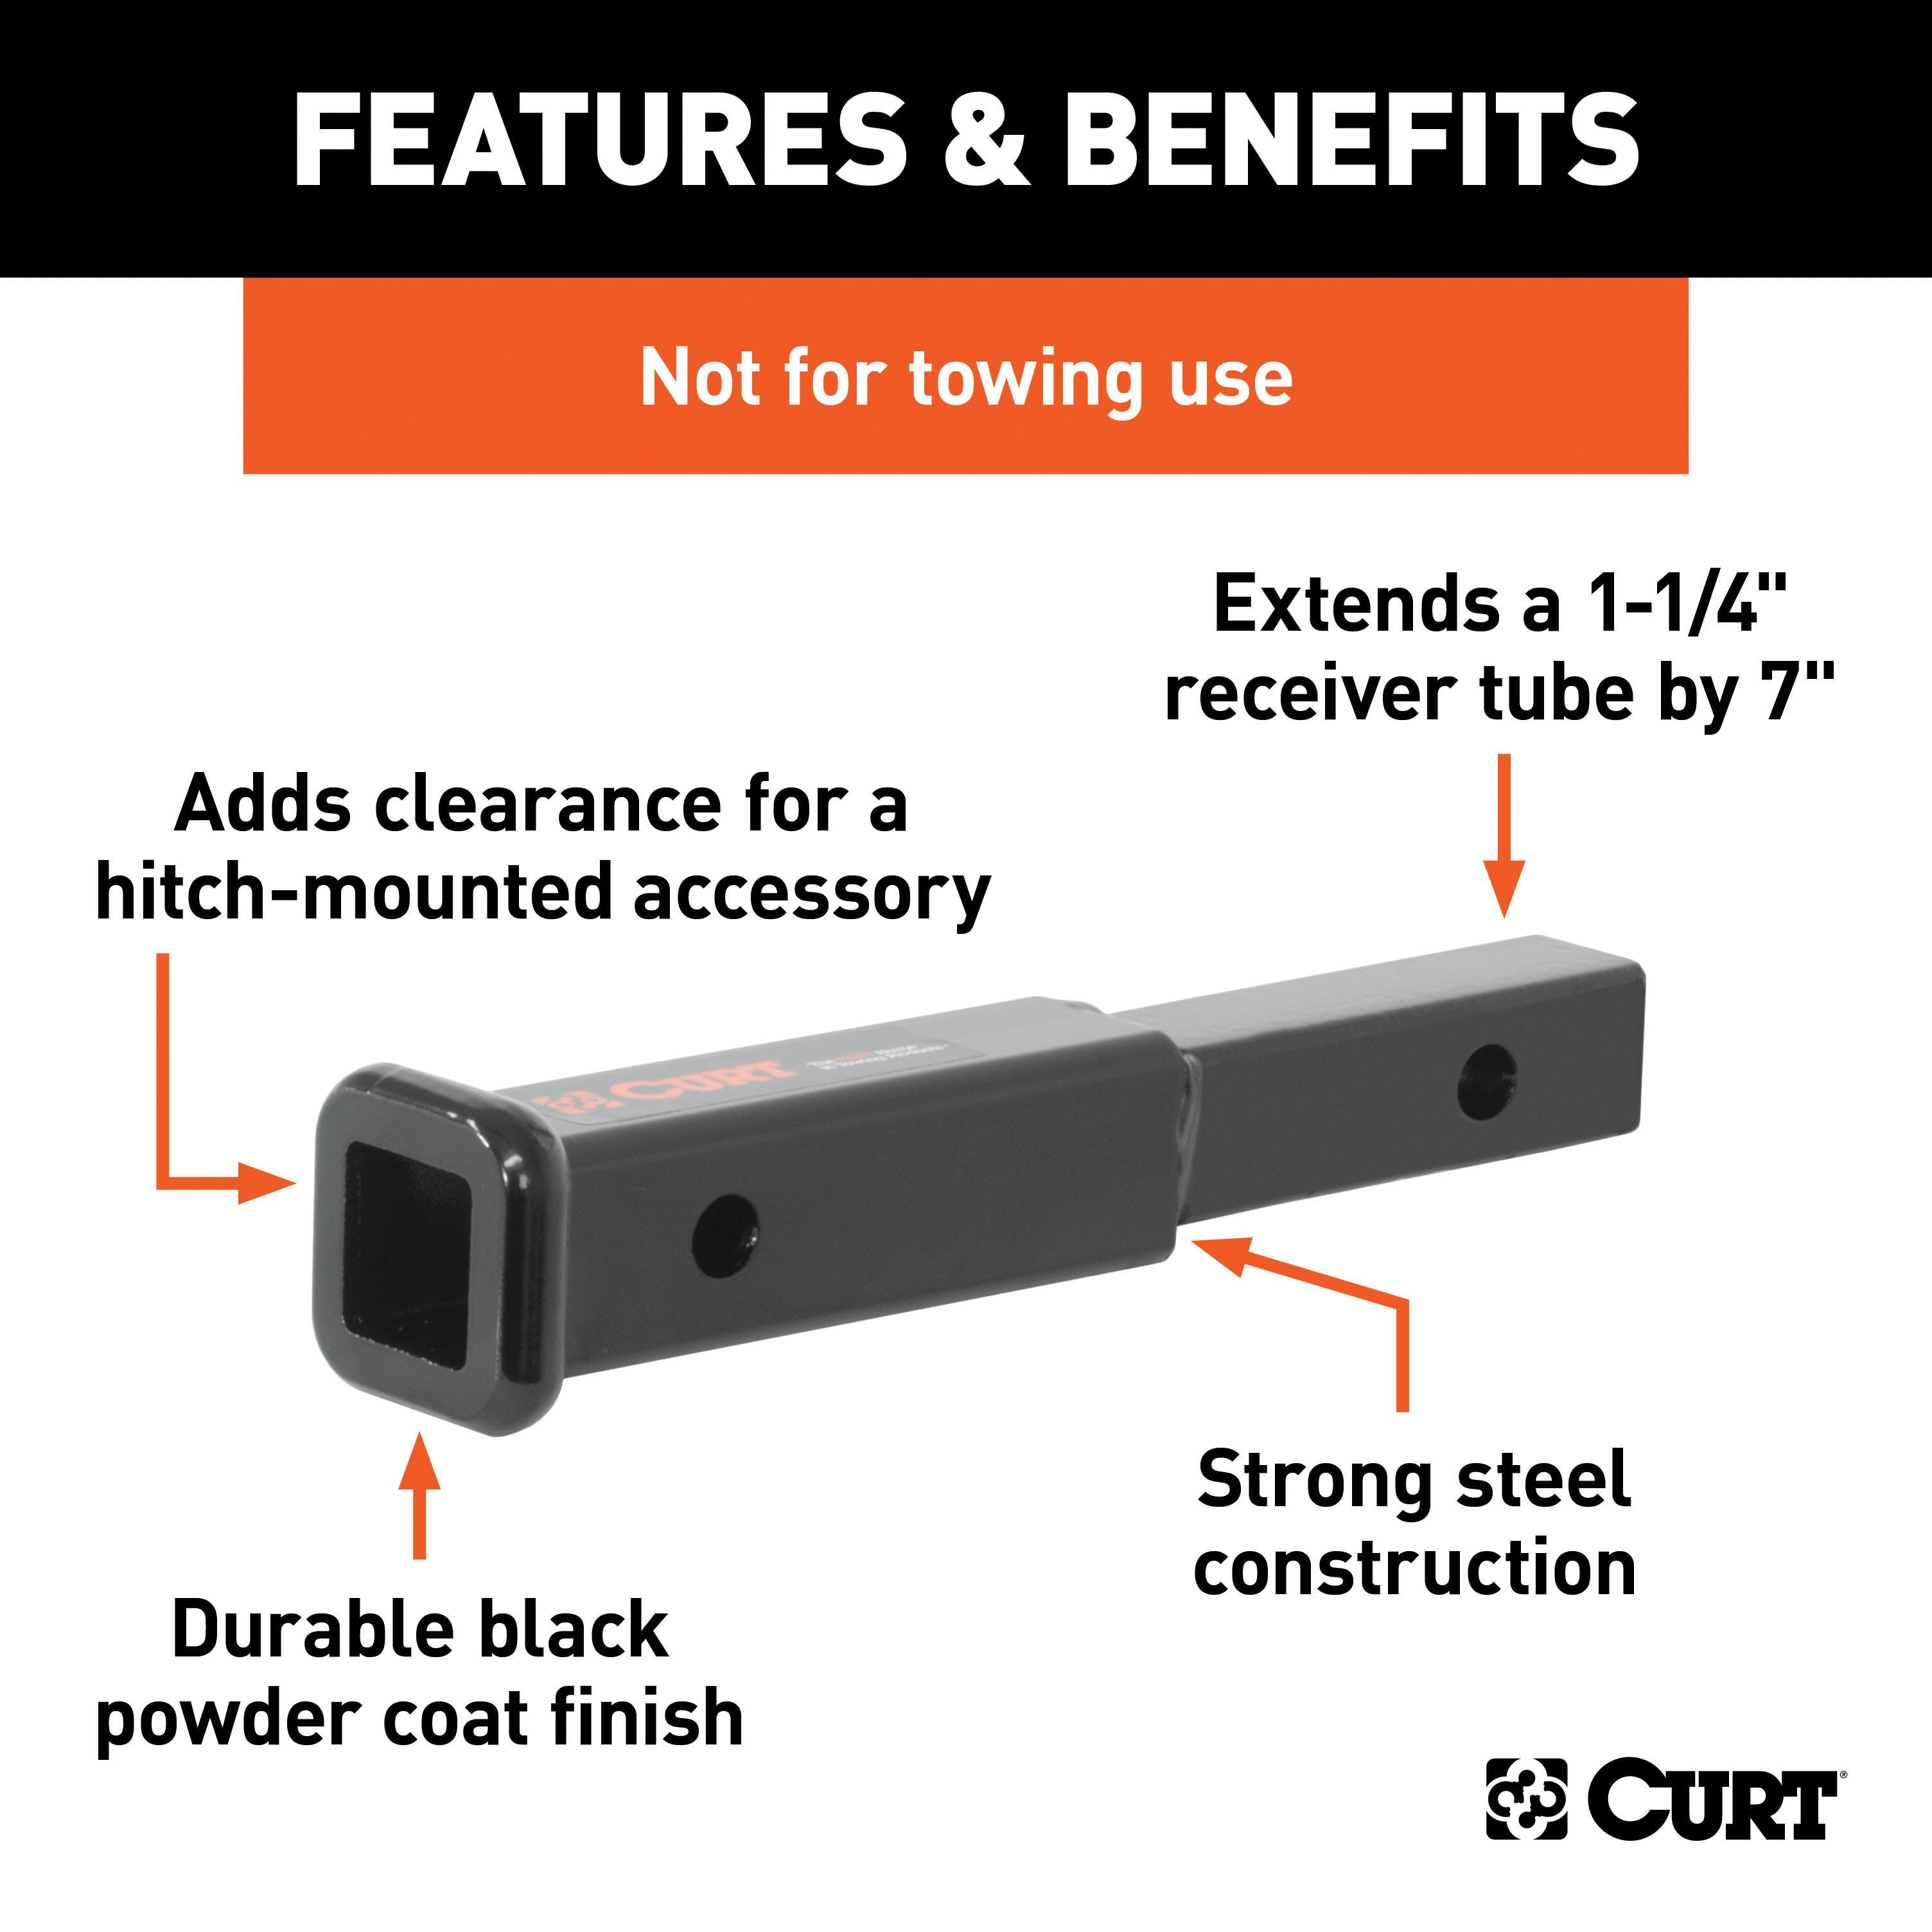 CURT 45789 7 Receiver Tube Extender (1-1/4 Shank, Not for Towing Use)